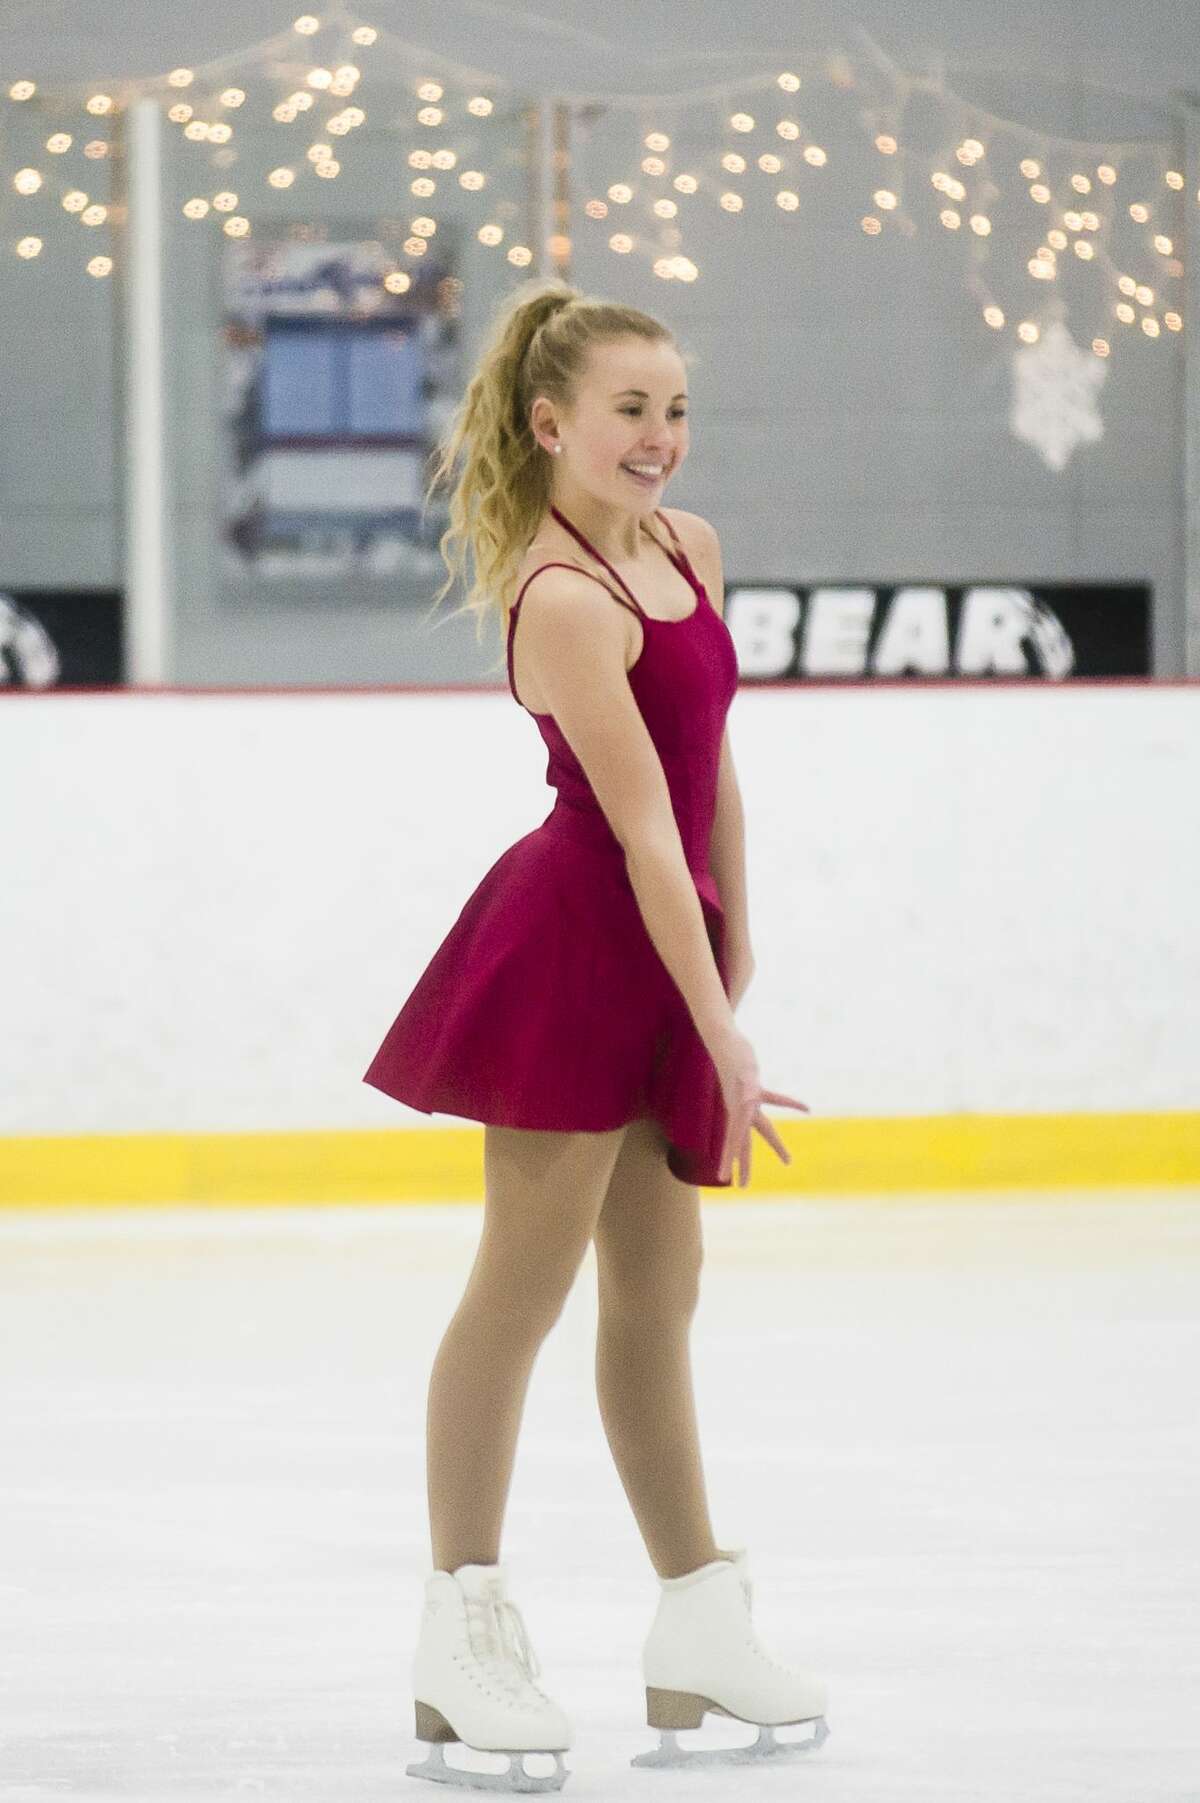 Kabela Hewitt performs during the Holiday Spectacular on Ice, presented by the Midland Figure Skating Club, Saturday, Dec. 21, 2019 at Midland Civic Arena. (Katy Kildee/kkildee@mdn.net)